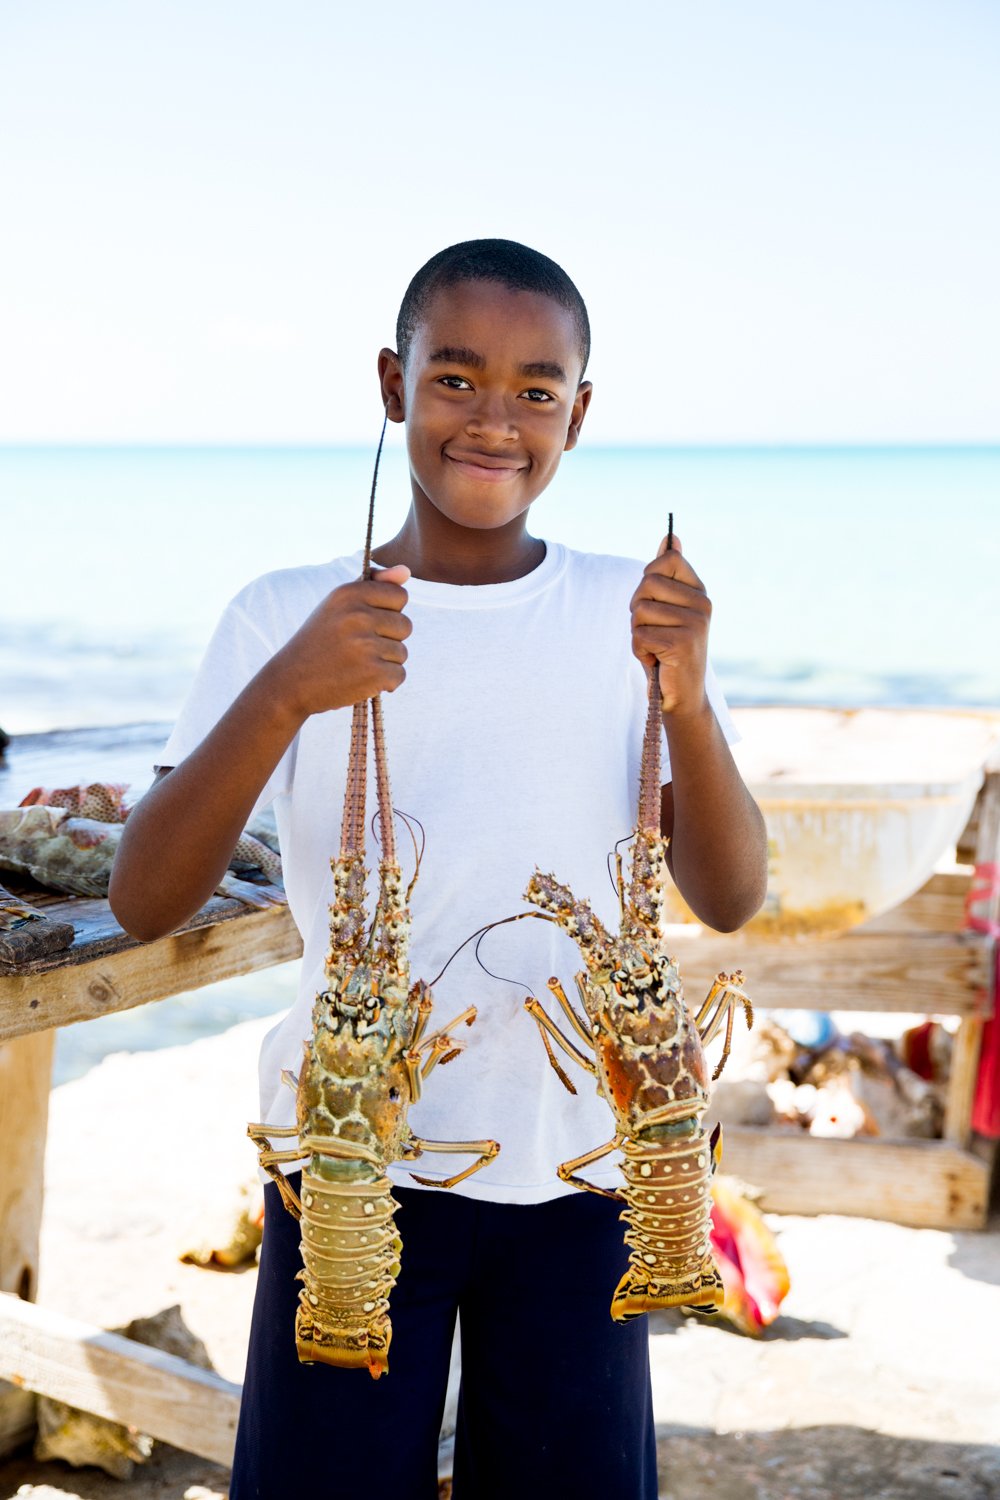 decenzo-angela-san-francisco-commercial-photographer-boy-holding-spiny-lobsters-20170331_MG_8627.jpg